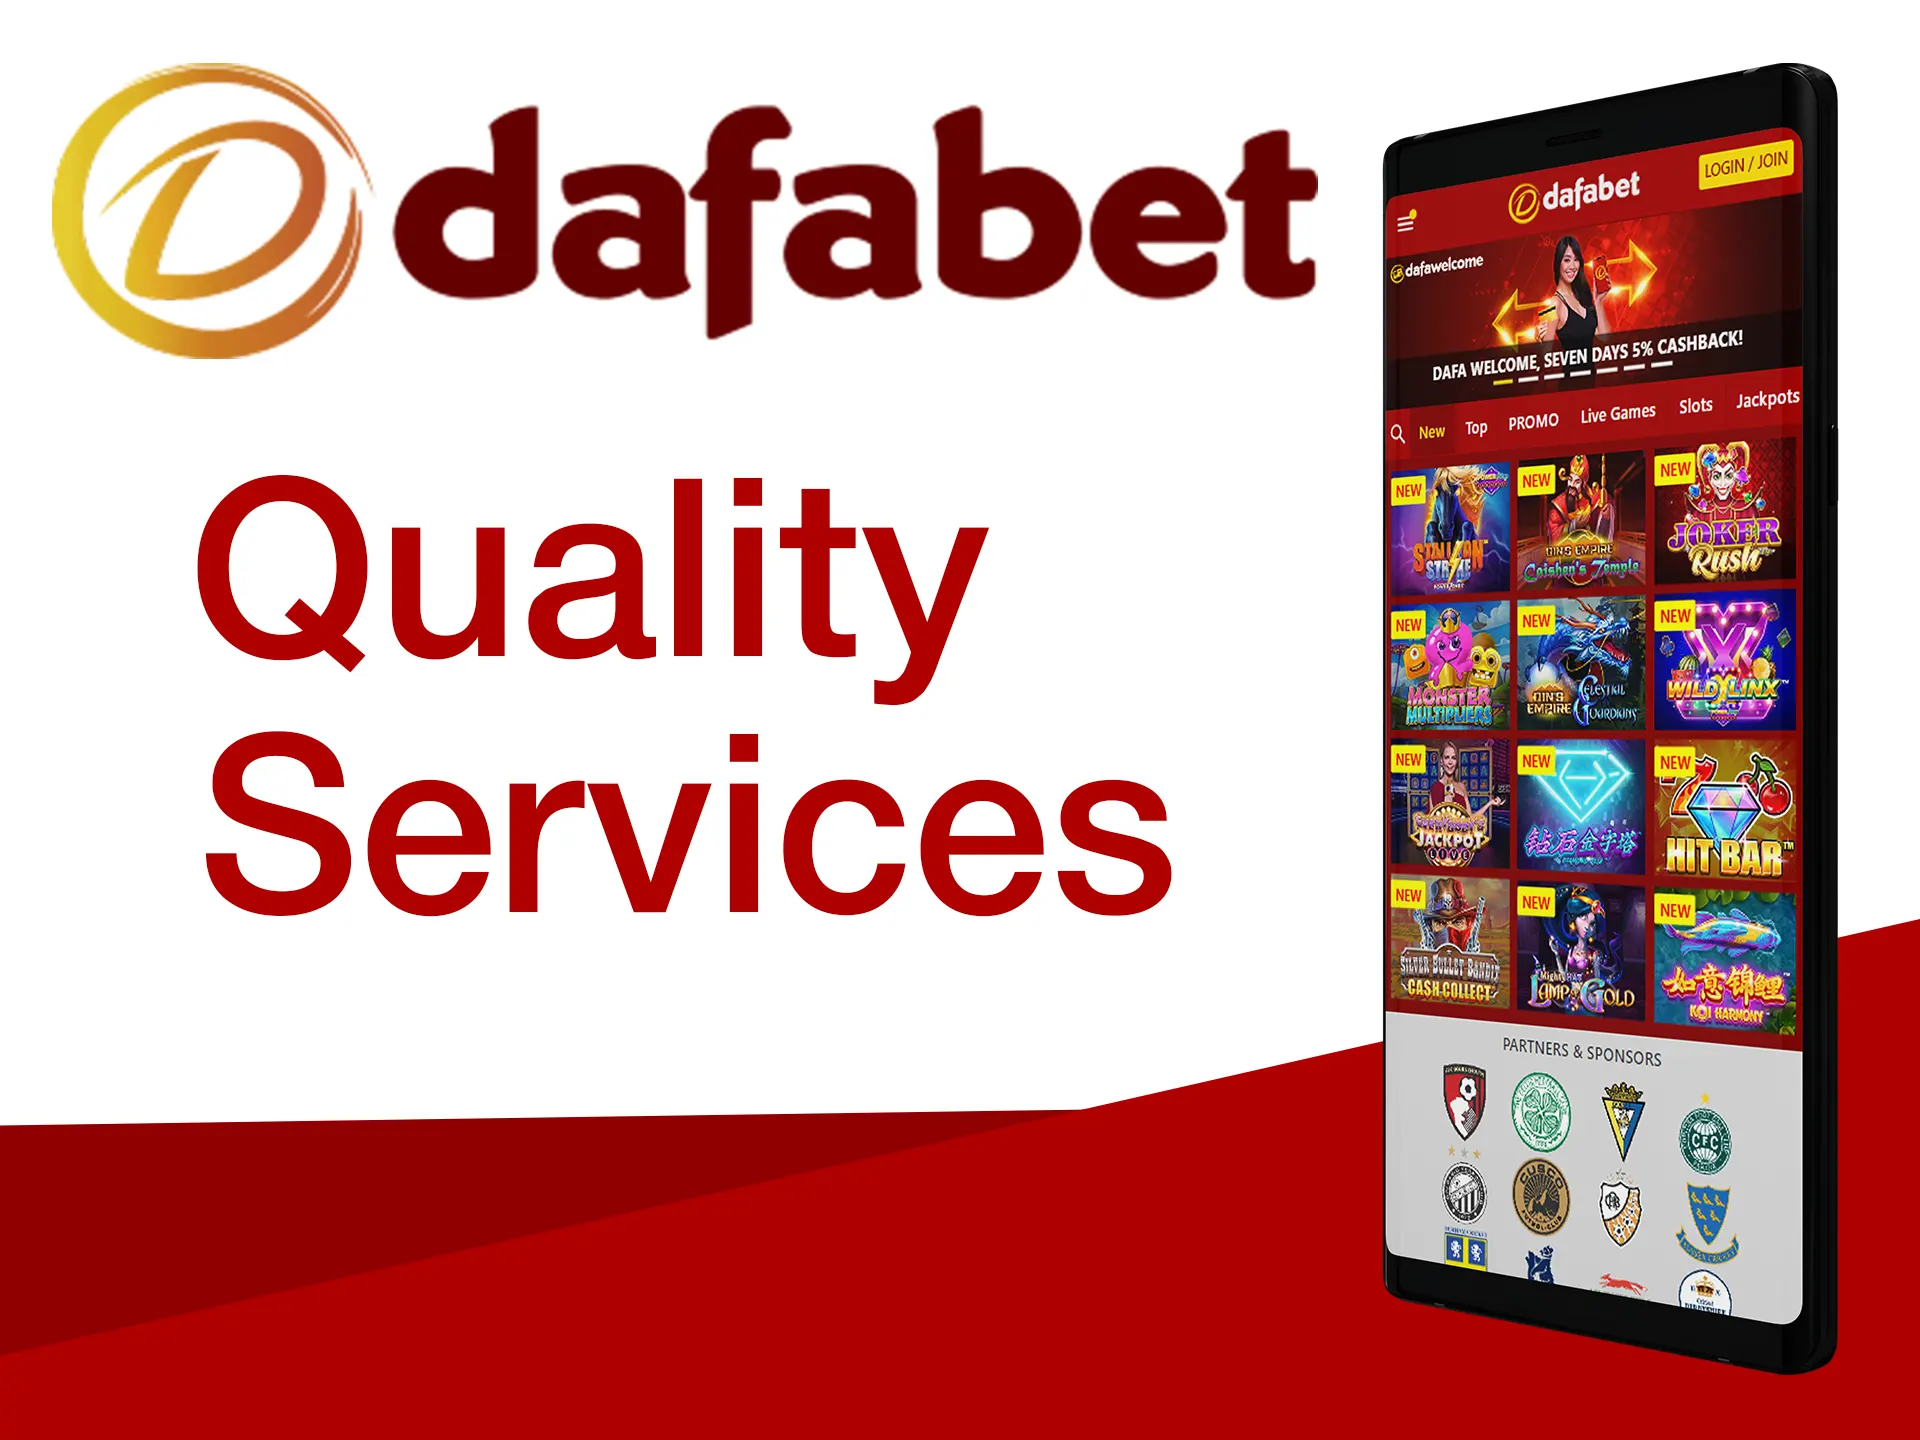 Learn more about intresting features of Dafabet services.